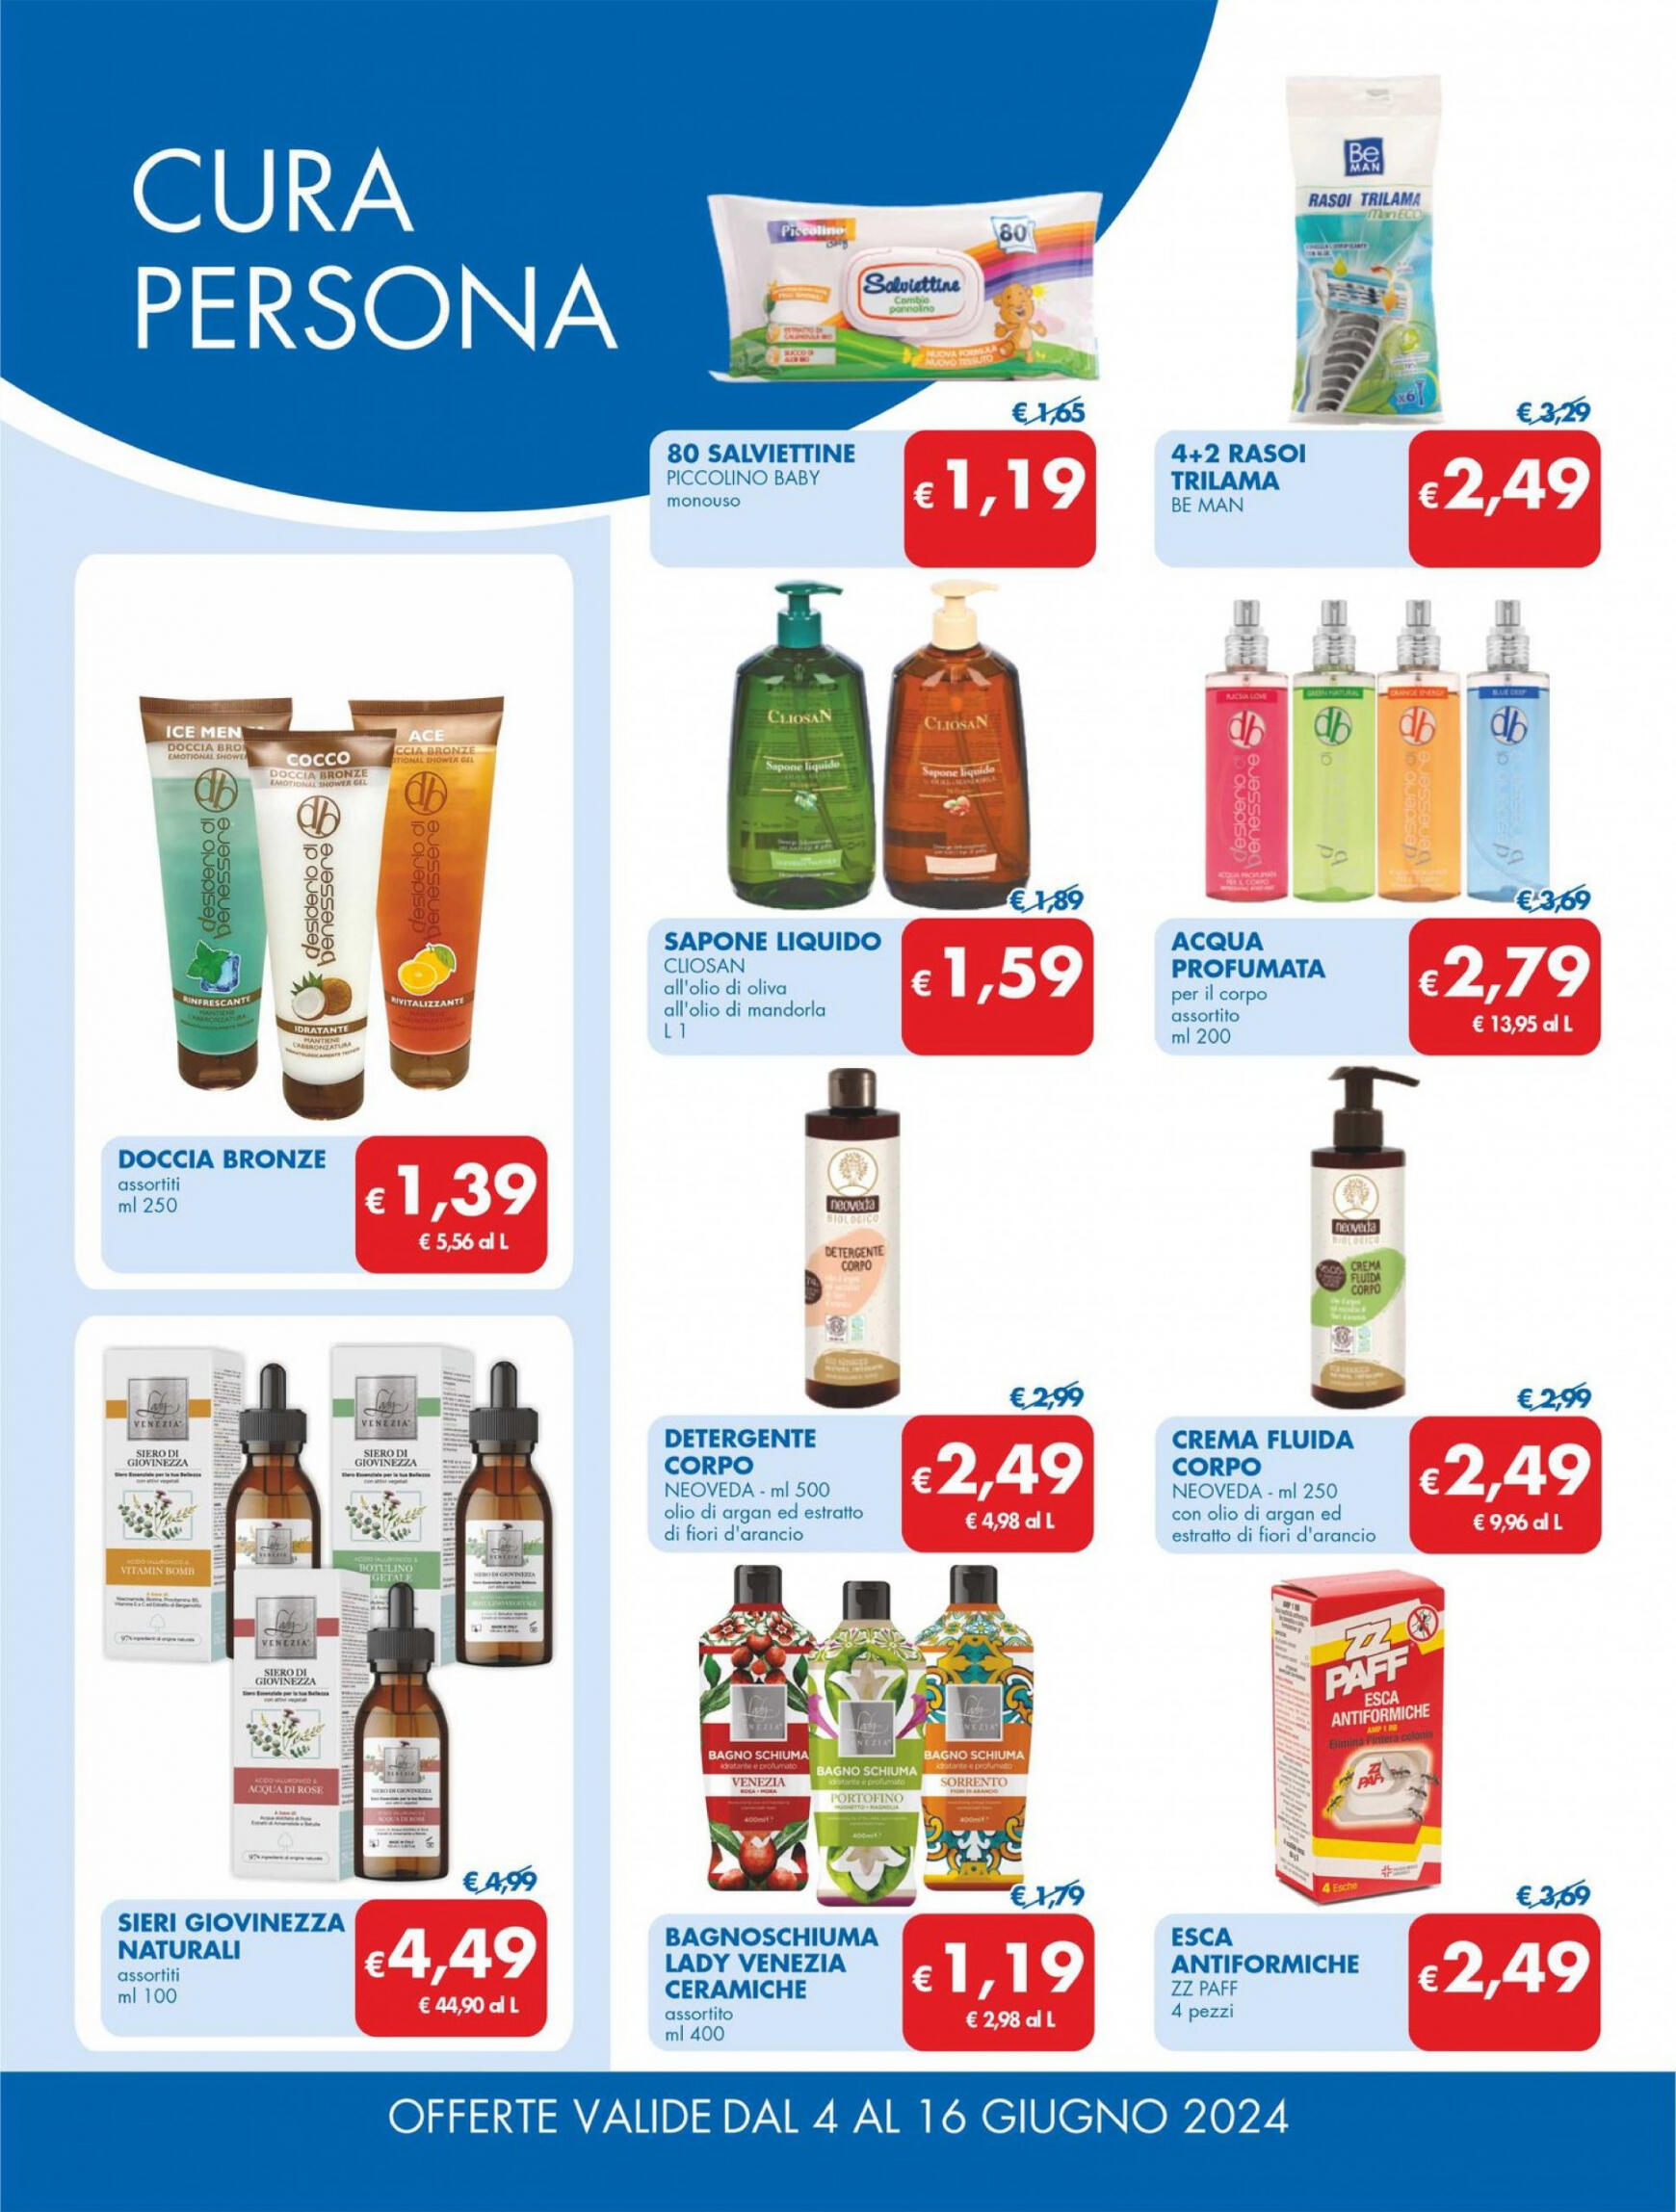 md-discount - Nuovo volantino MD 04.06. - 16.06. - page: 22